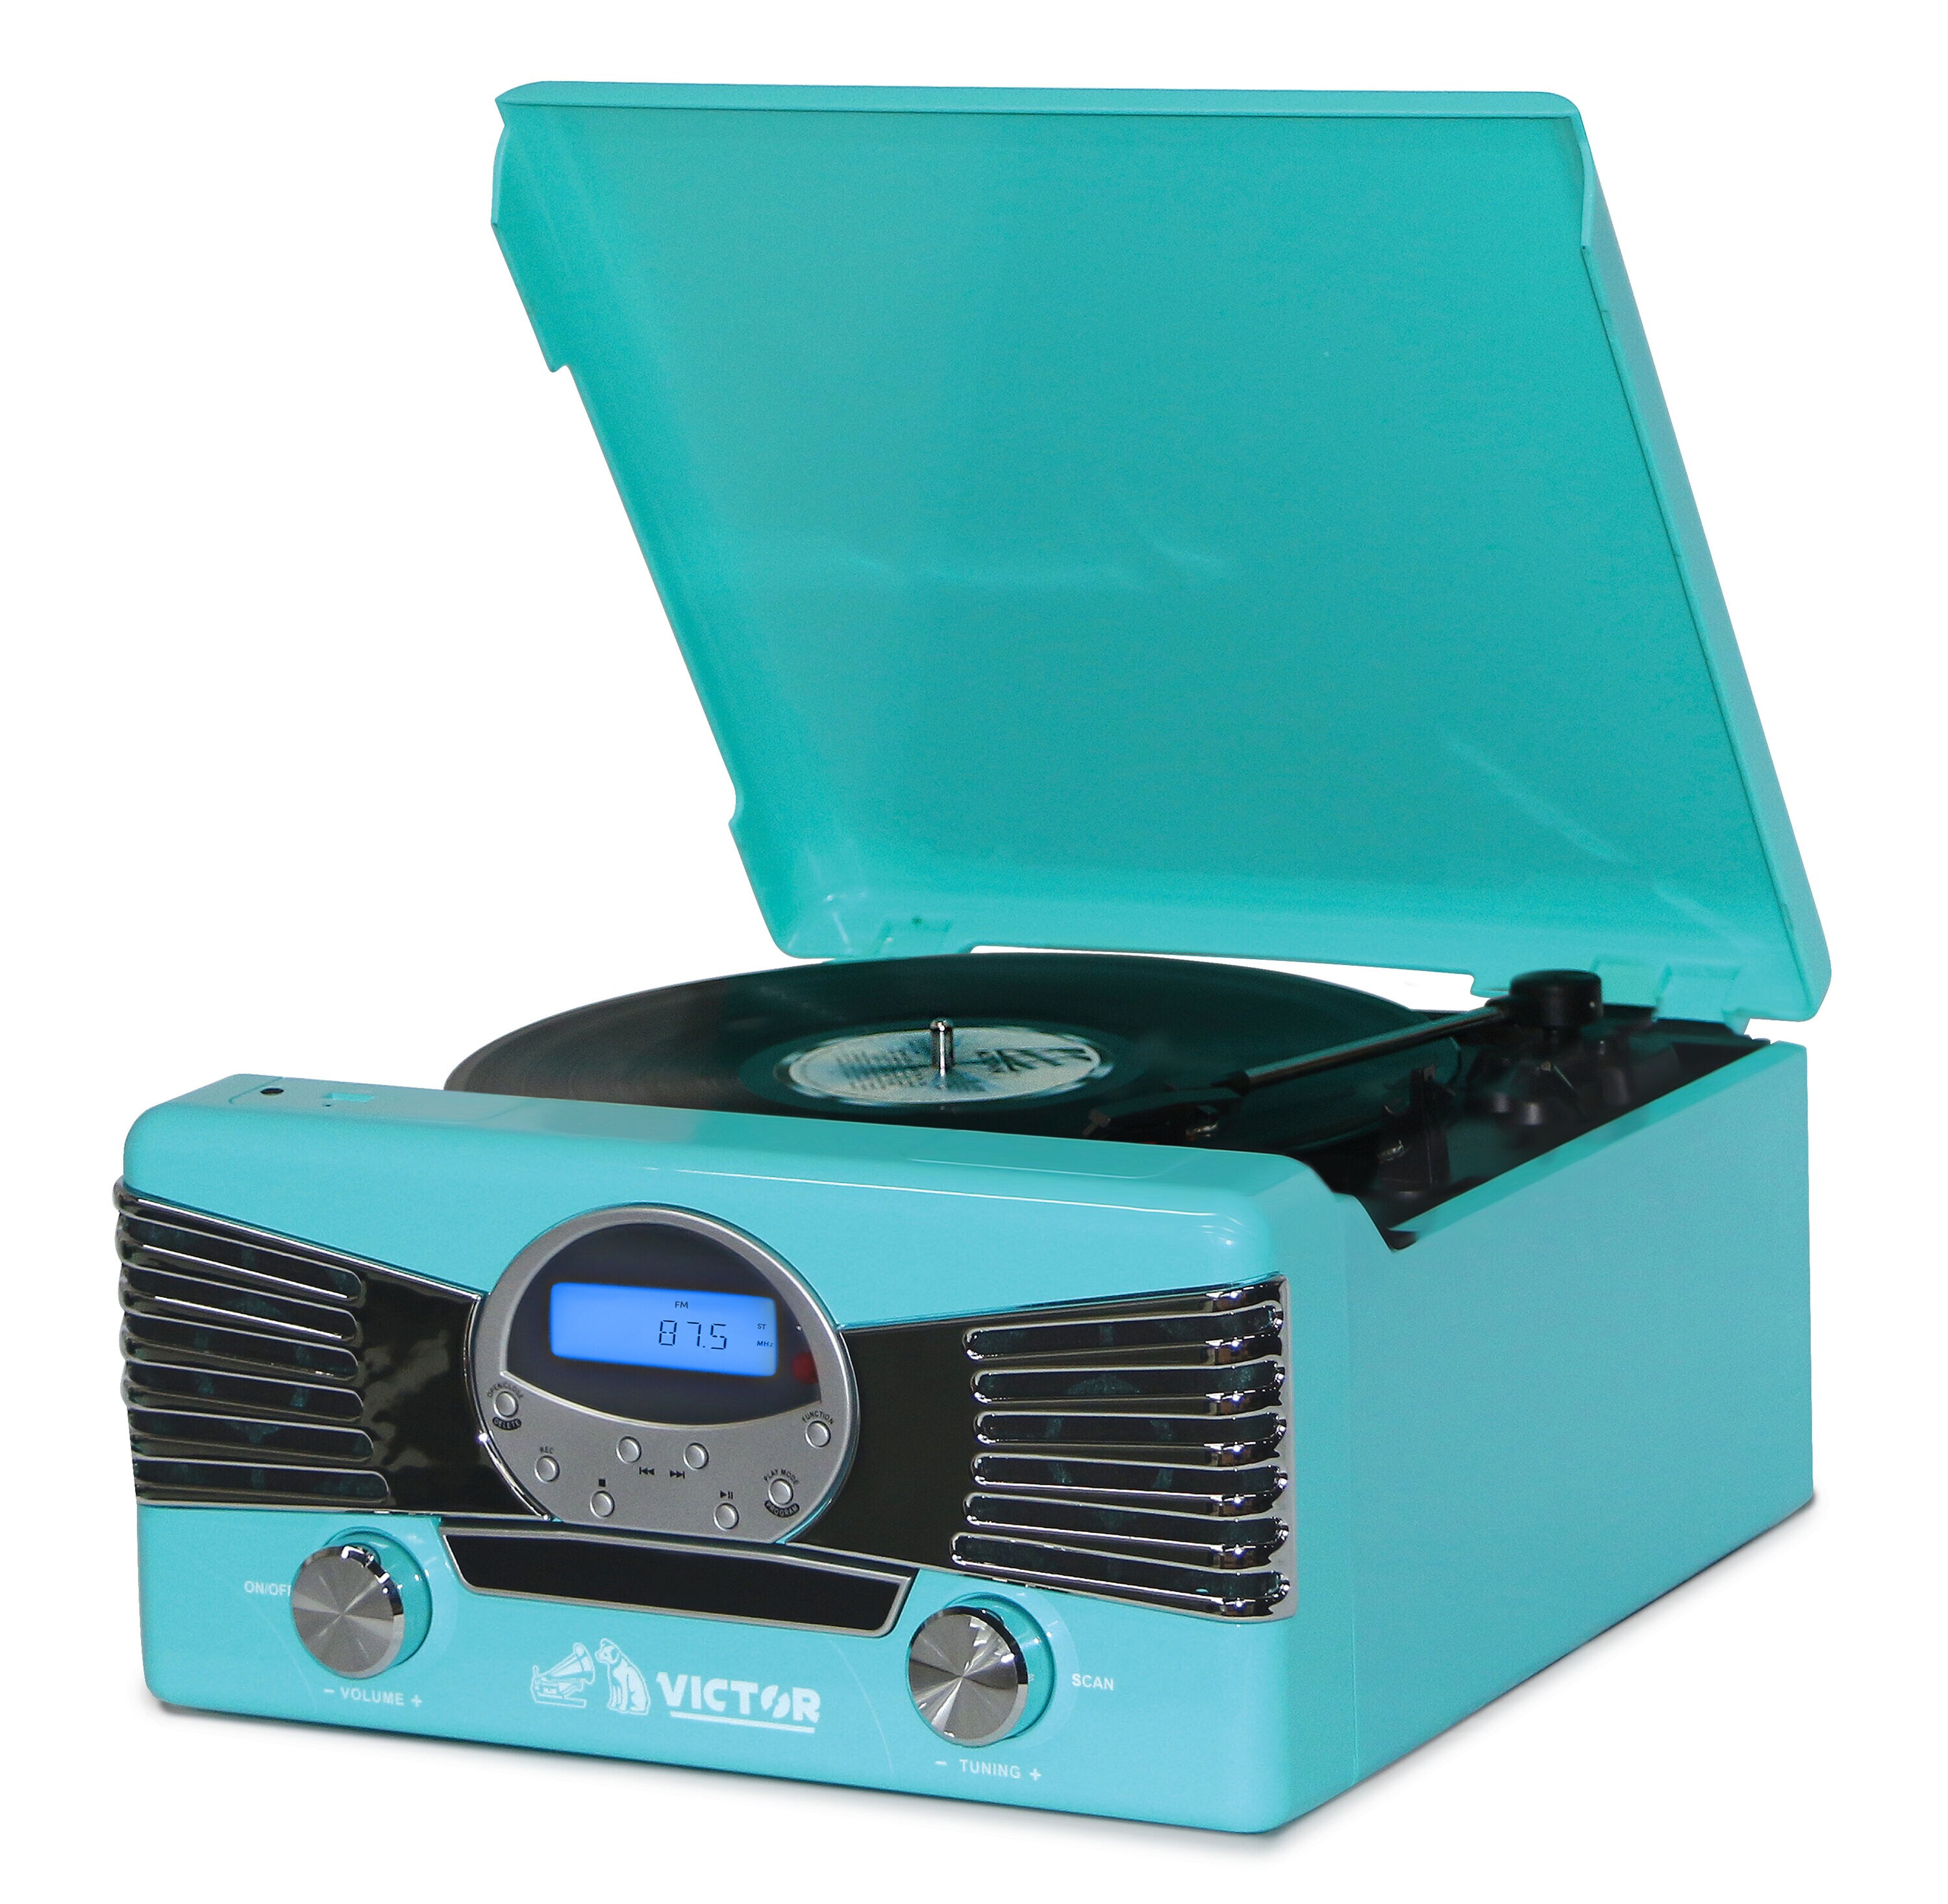 Blue Bluetooth 3-Speed Turntable with Built-In Speakers, CD Player, Radio, and USB Connectivity | - Victor VHRP-1400-TQ